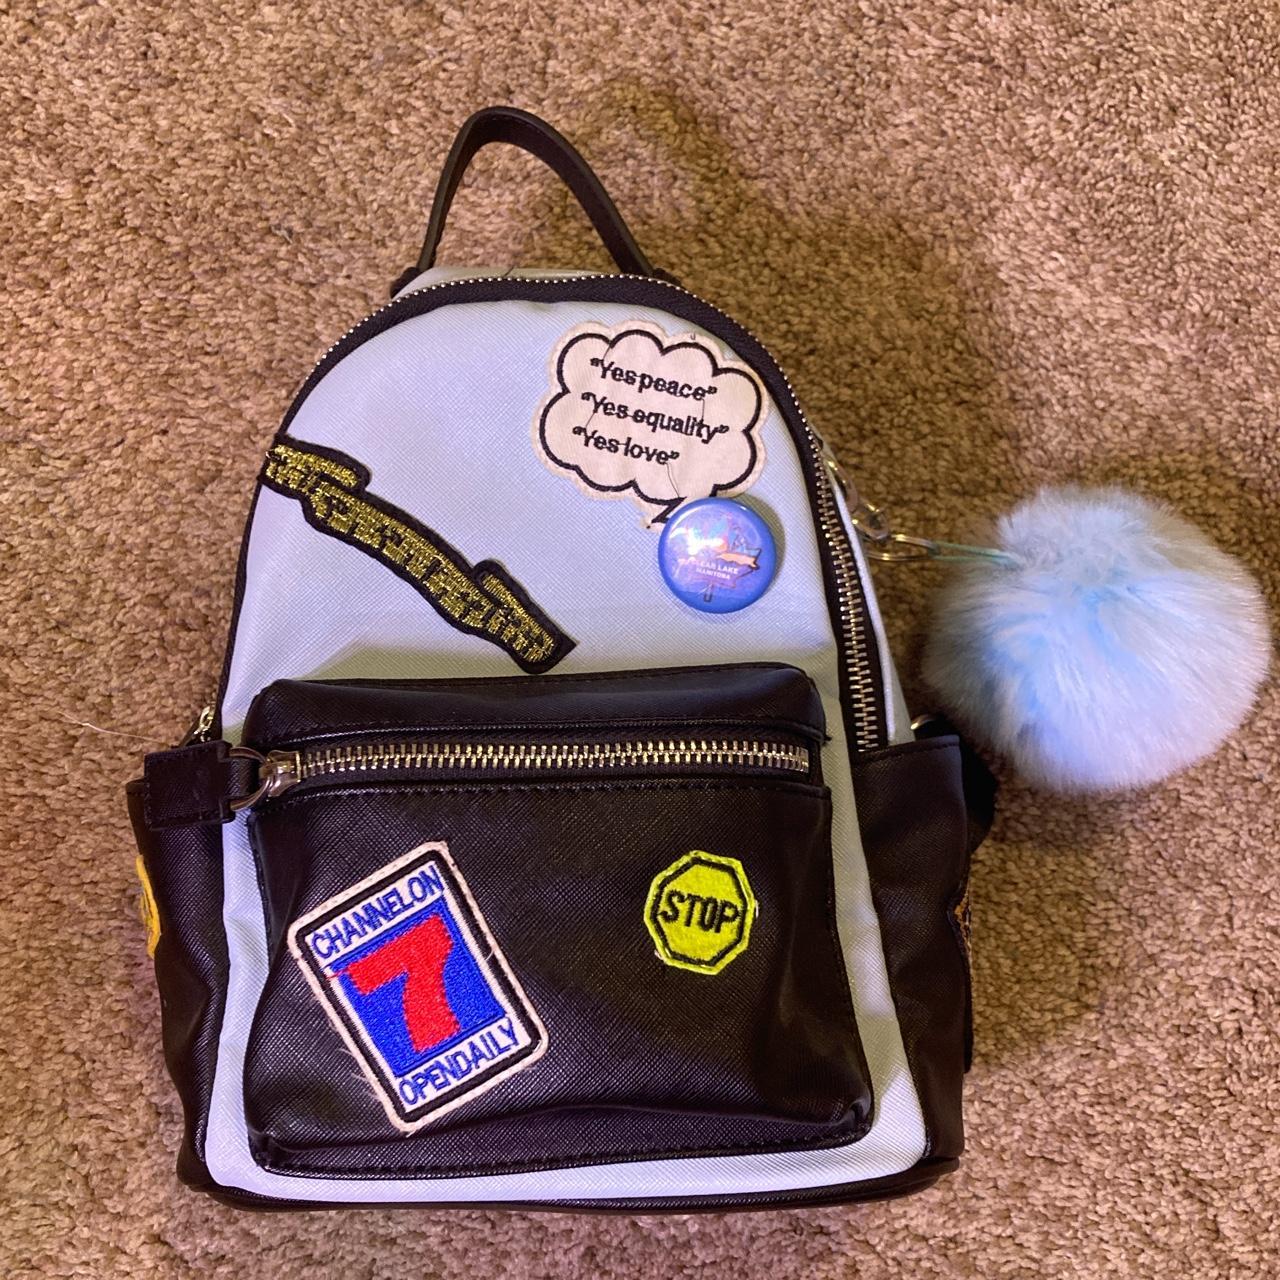 CUTE BLUE m&m BACKPACK ! FITS QUITE A BIT AND SO - Depop